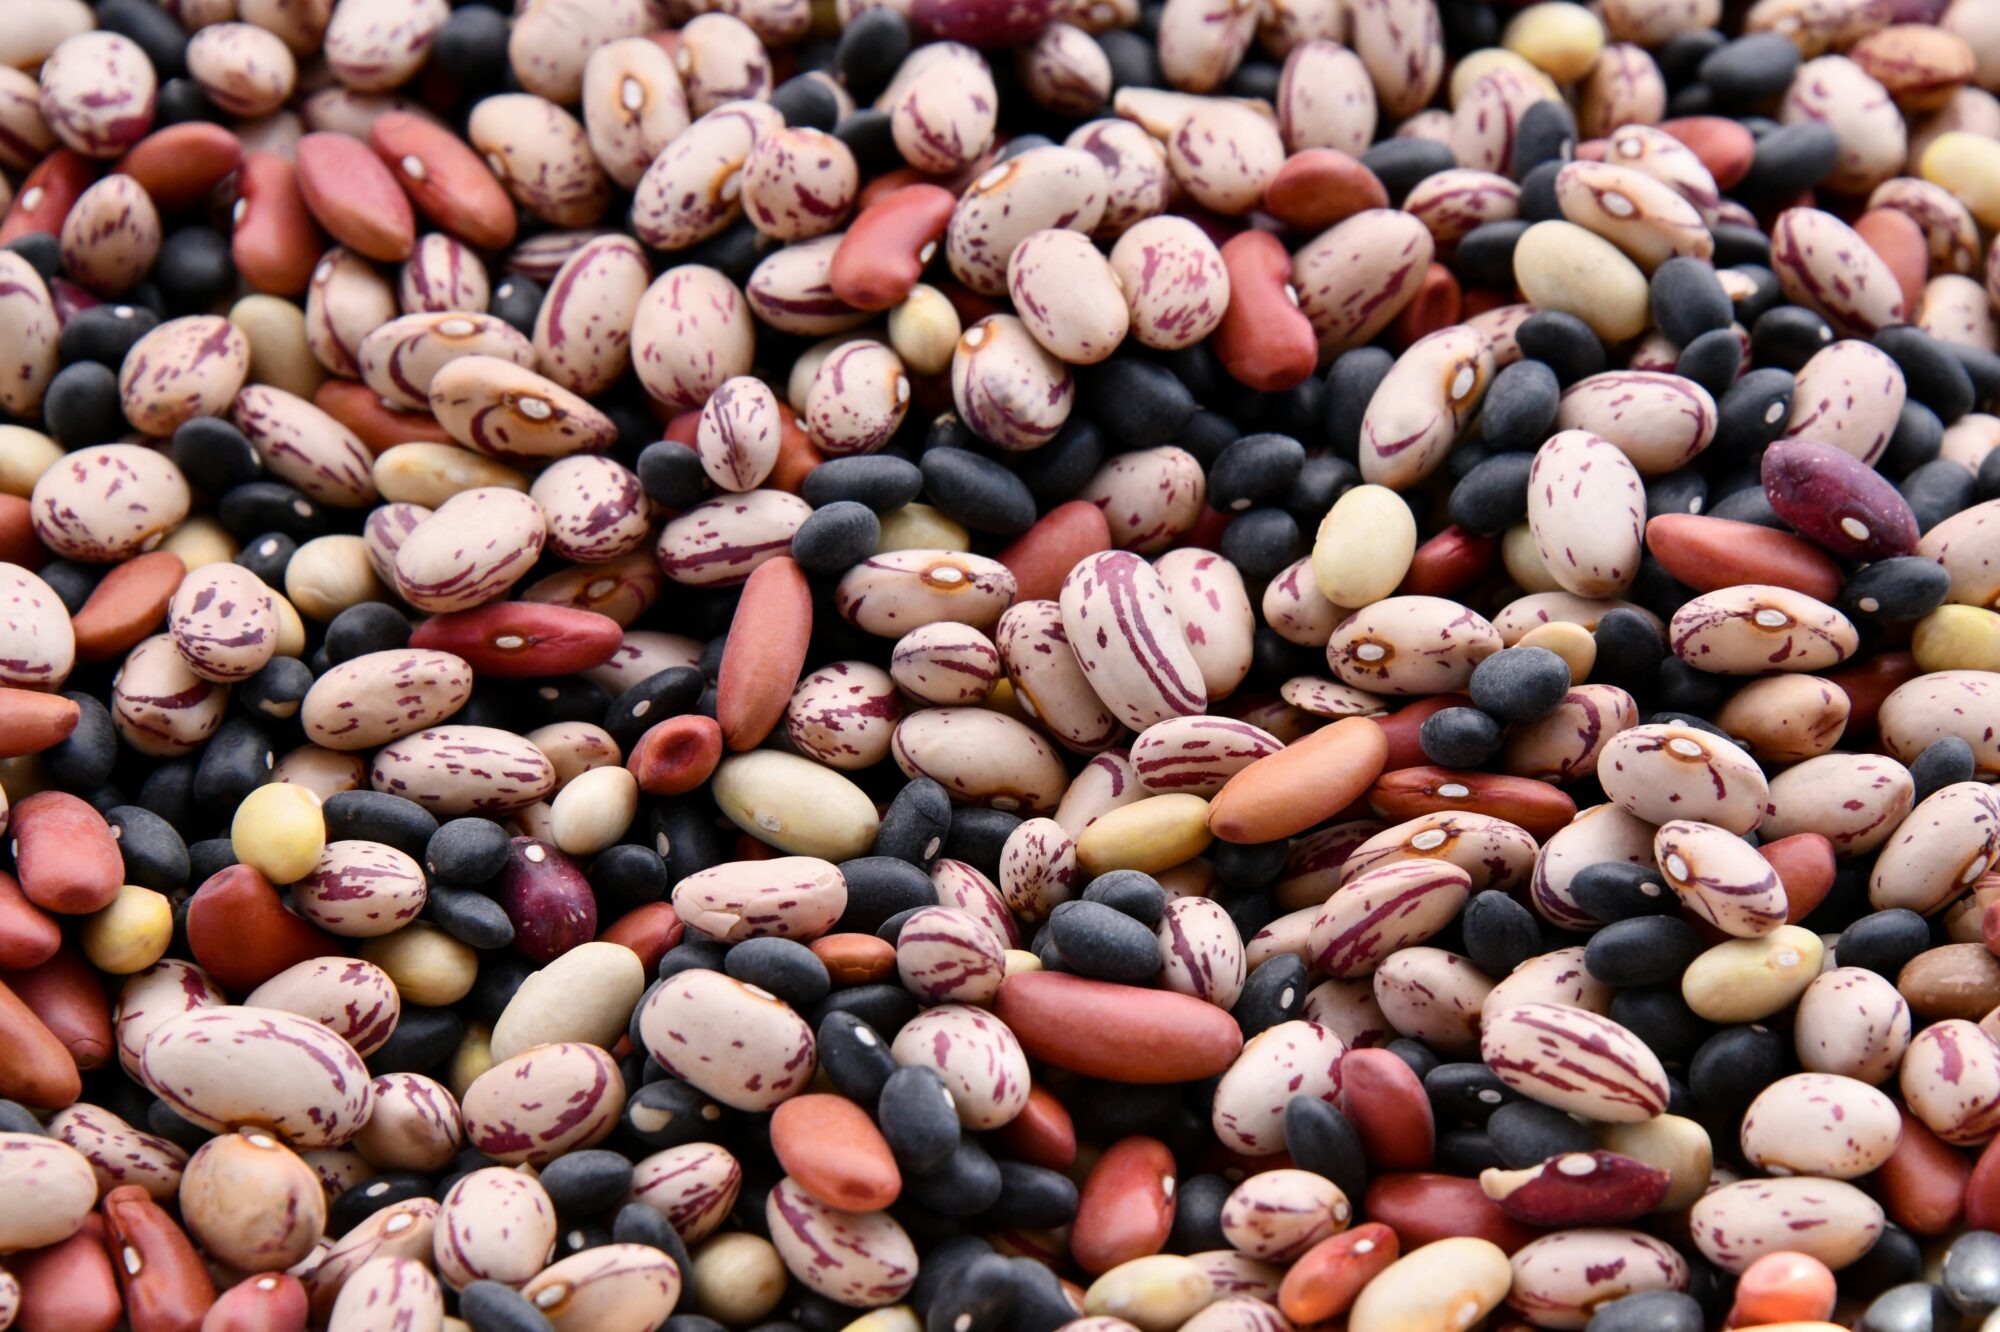 A variety of colourful dried beans